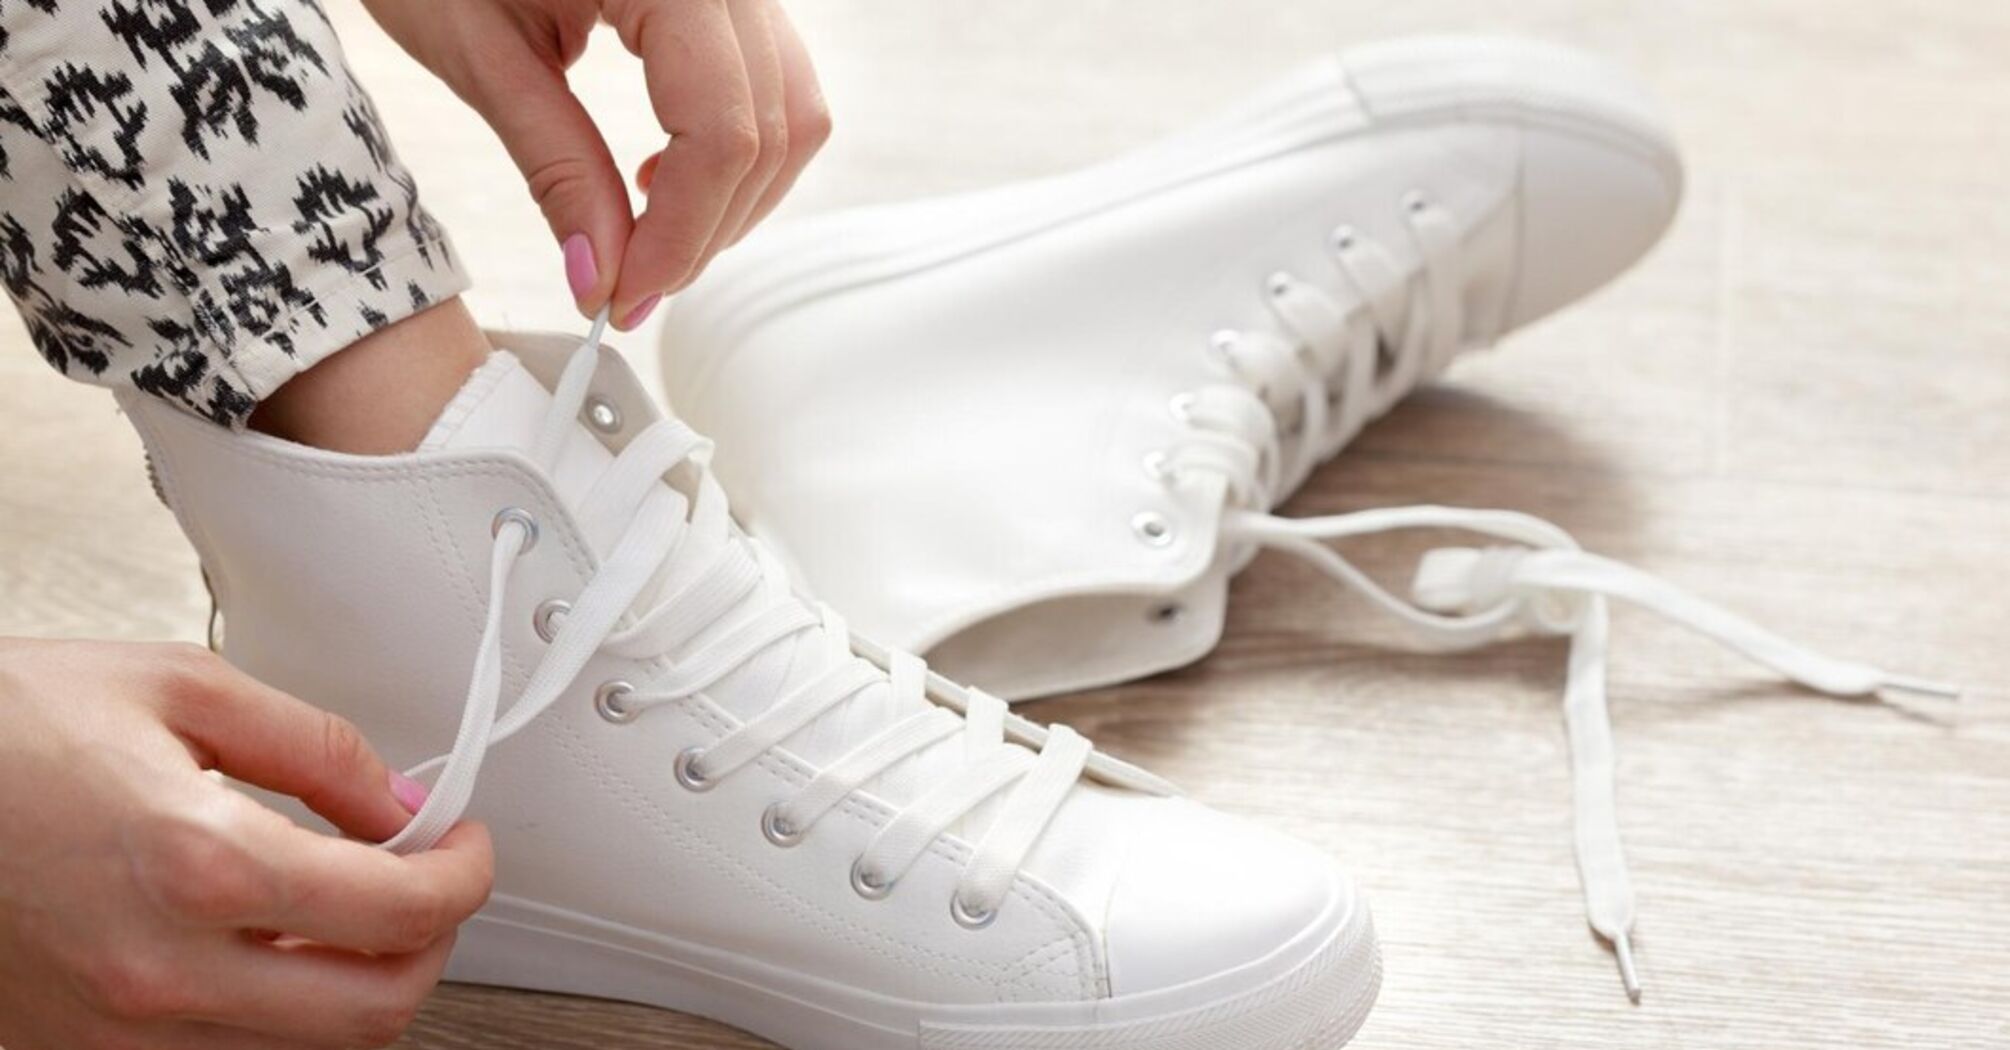 How to get rid of unpleasant odor from shoes: Three effective tips